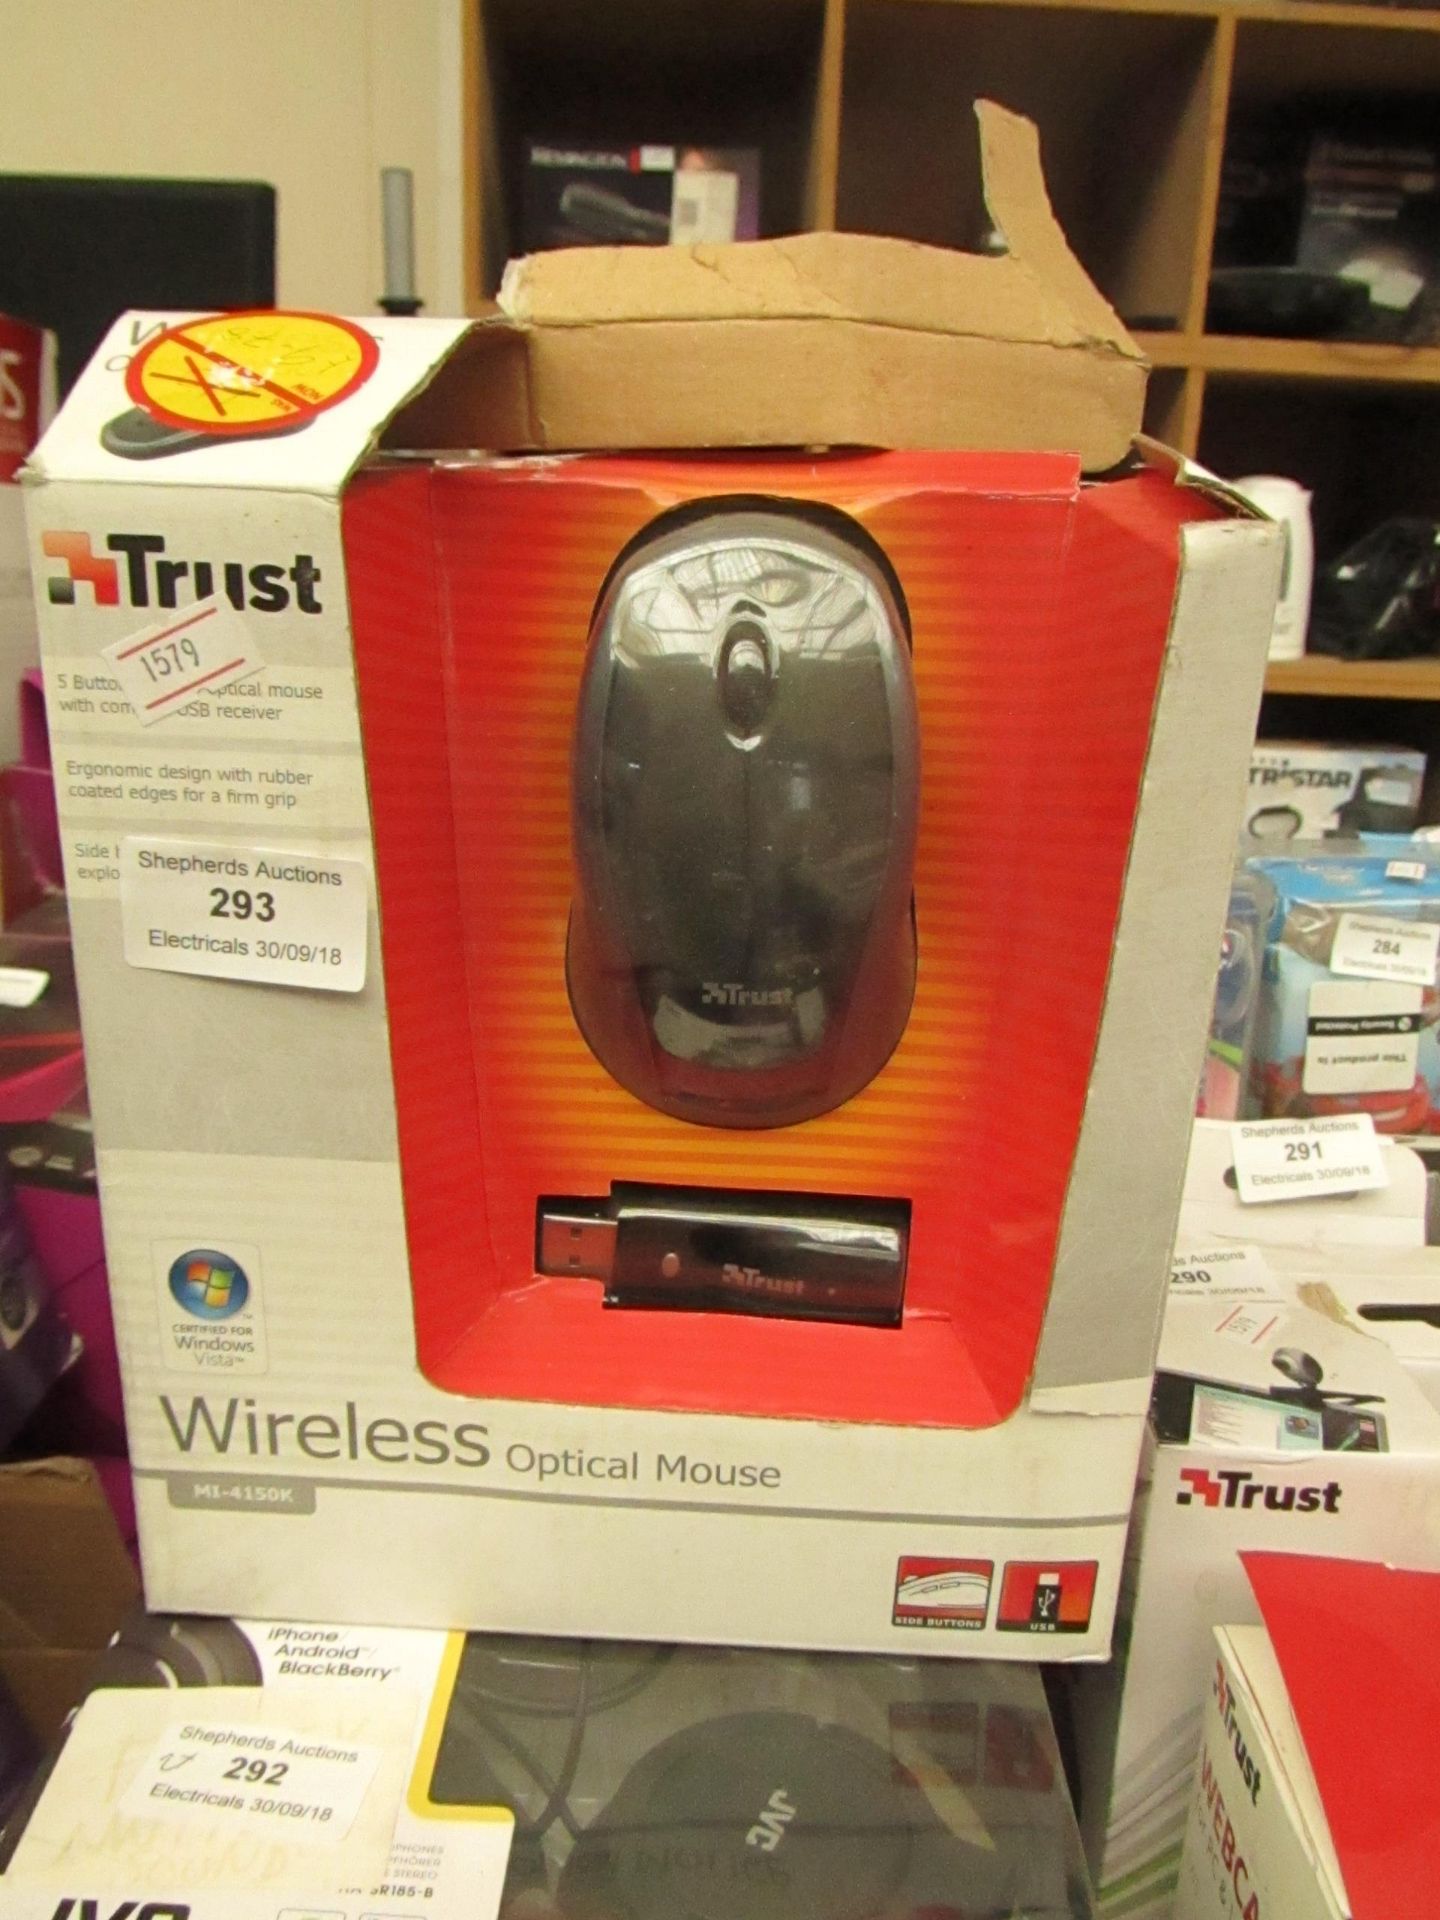 Trust wireless optical mouse, untested and boxed.